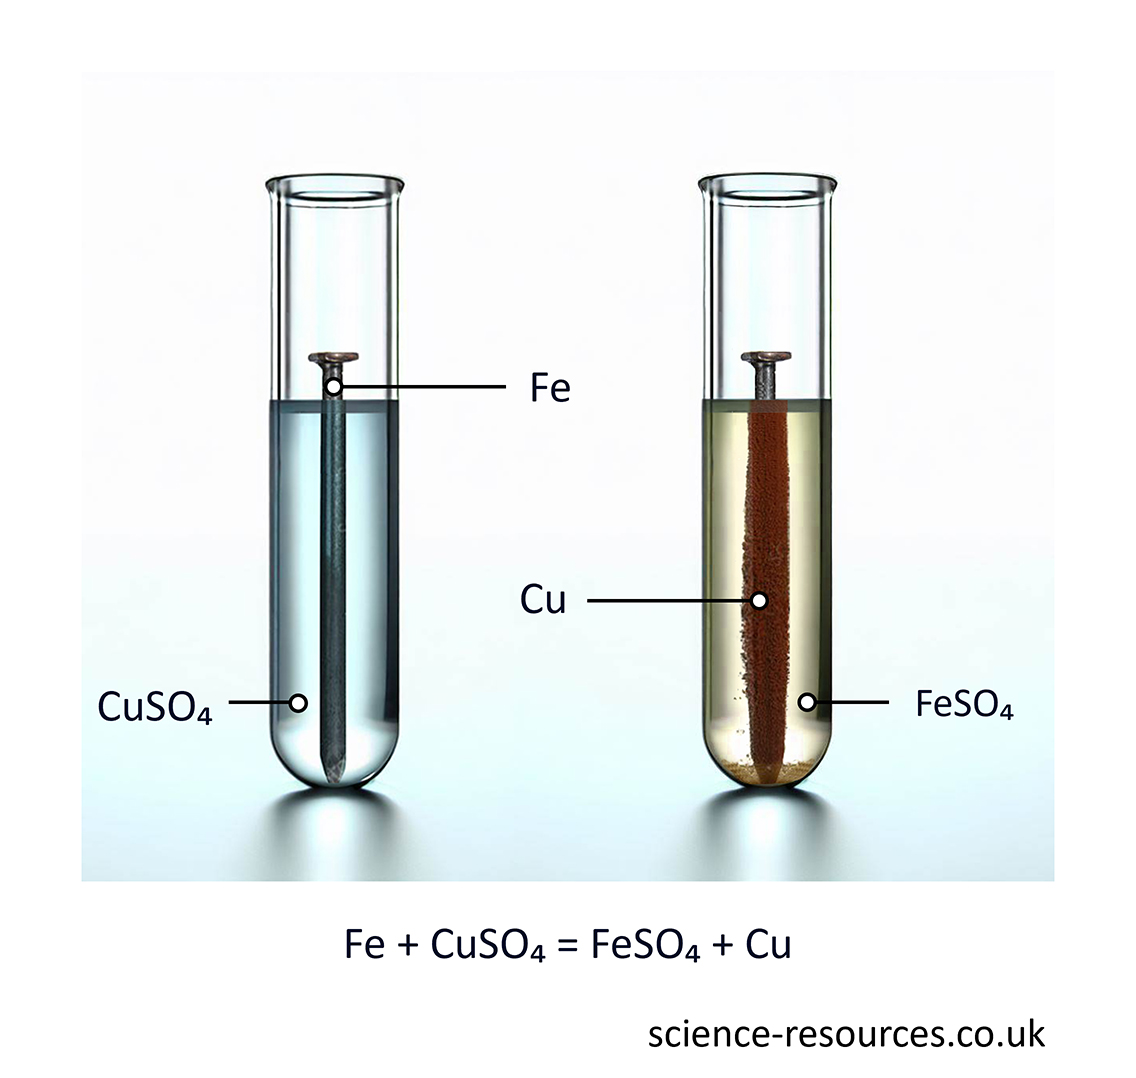 This image is a diagram that shows a displacement reaction between iron and copper sulfate. A displacement reaction is a type of chemical reaction where a more reactive metal displaces a less reactive metal from its compound. In this case, iron is more reactive than copper, so it replaces copper in copper sulfate and forms iron sulfate and copper. The image shows the change in color and composition of the solution and the iron nail before and after the reaction. The image also shows the chemical equation for the reaction. 